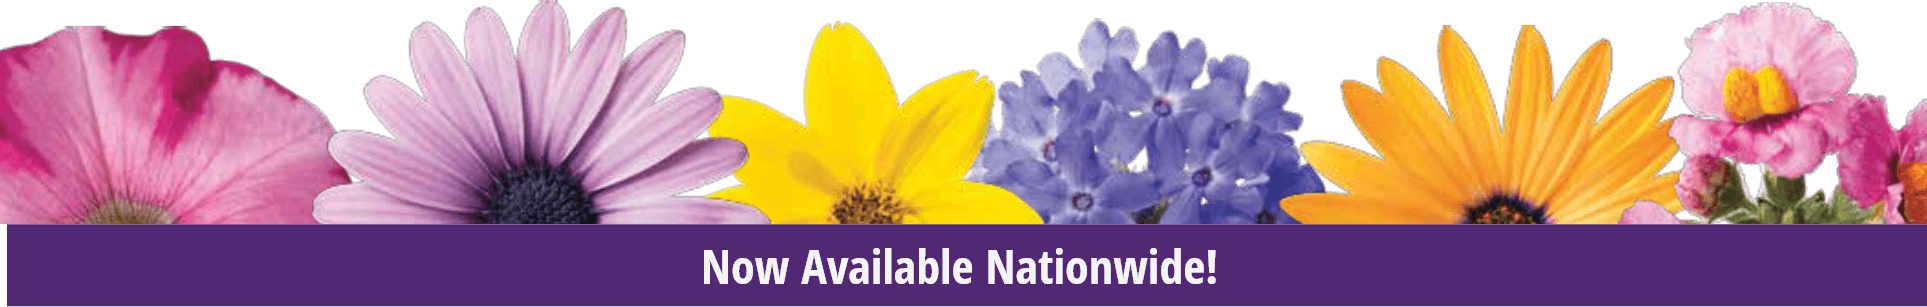 An assortment of flowers with a banner that says "now available nationwide!"